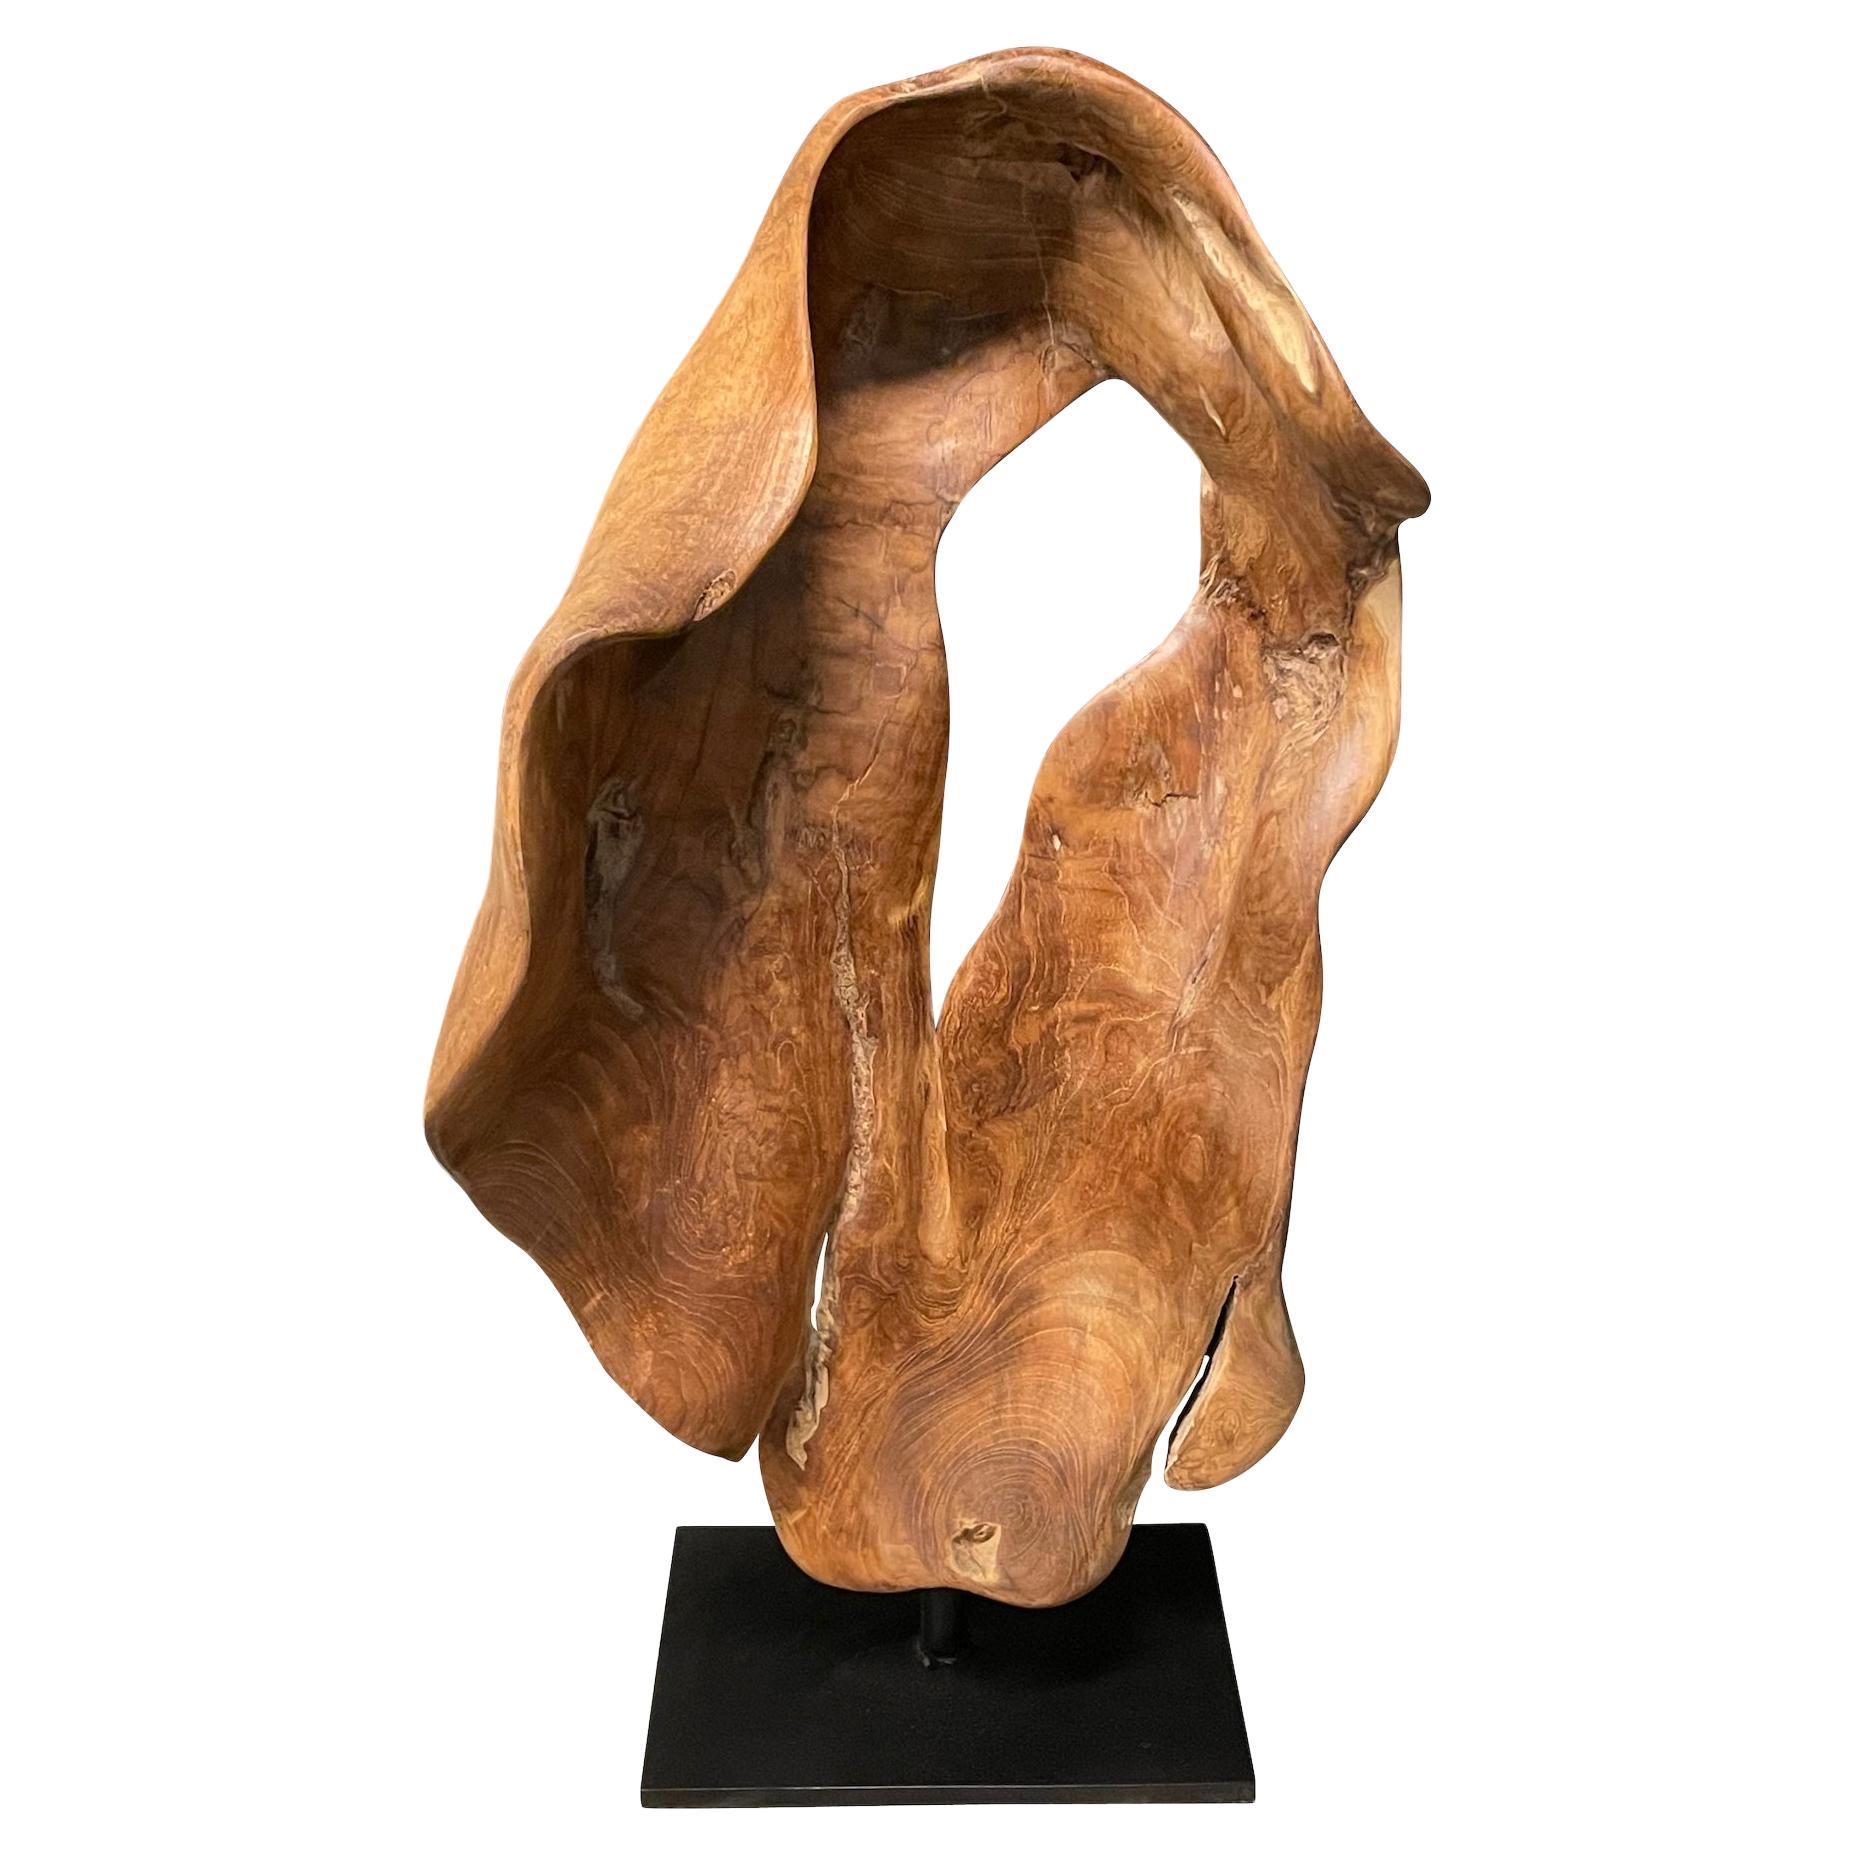 Teak Wood Organic Shape Sculpture on Stand, Indonesia, Contemporary